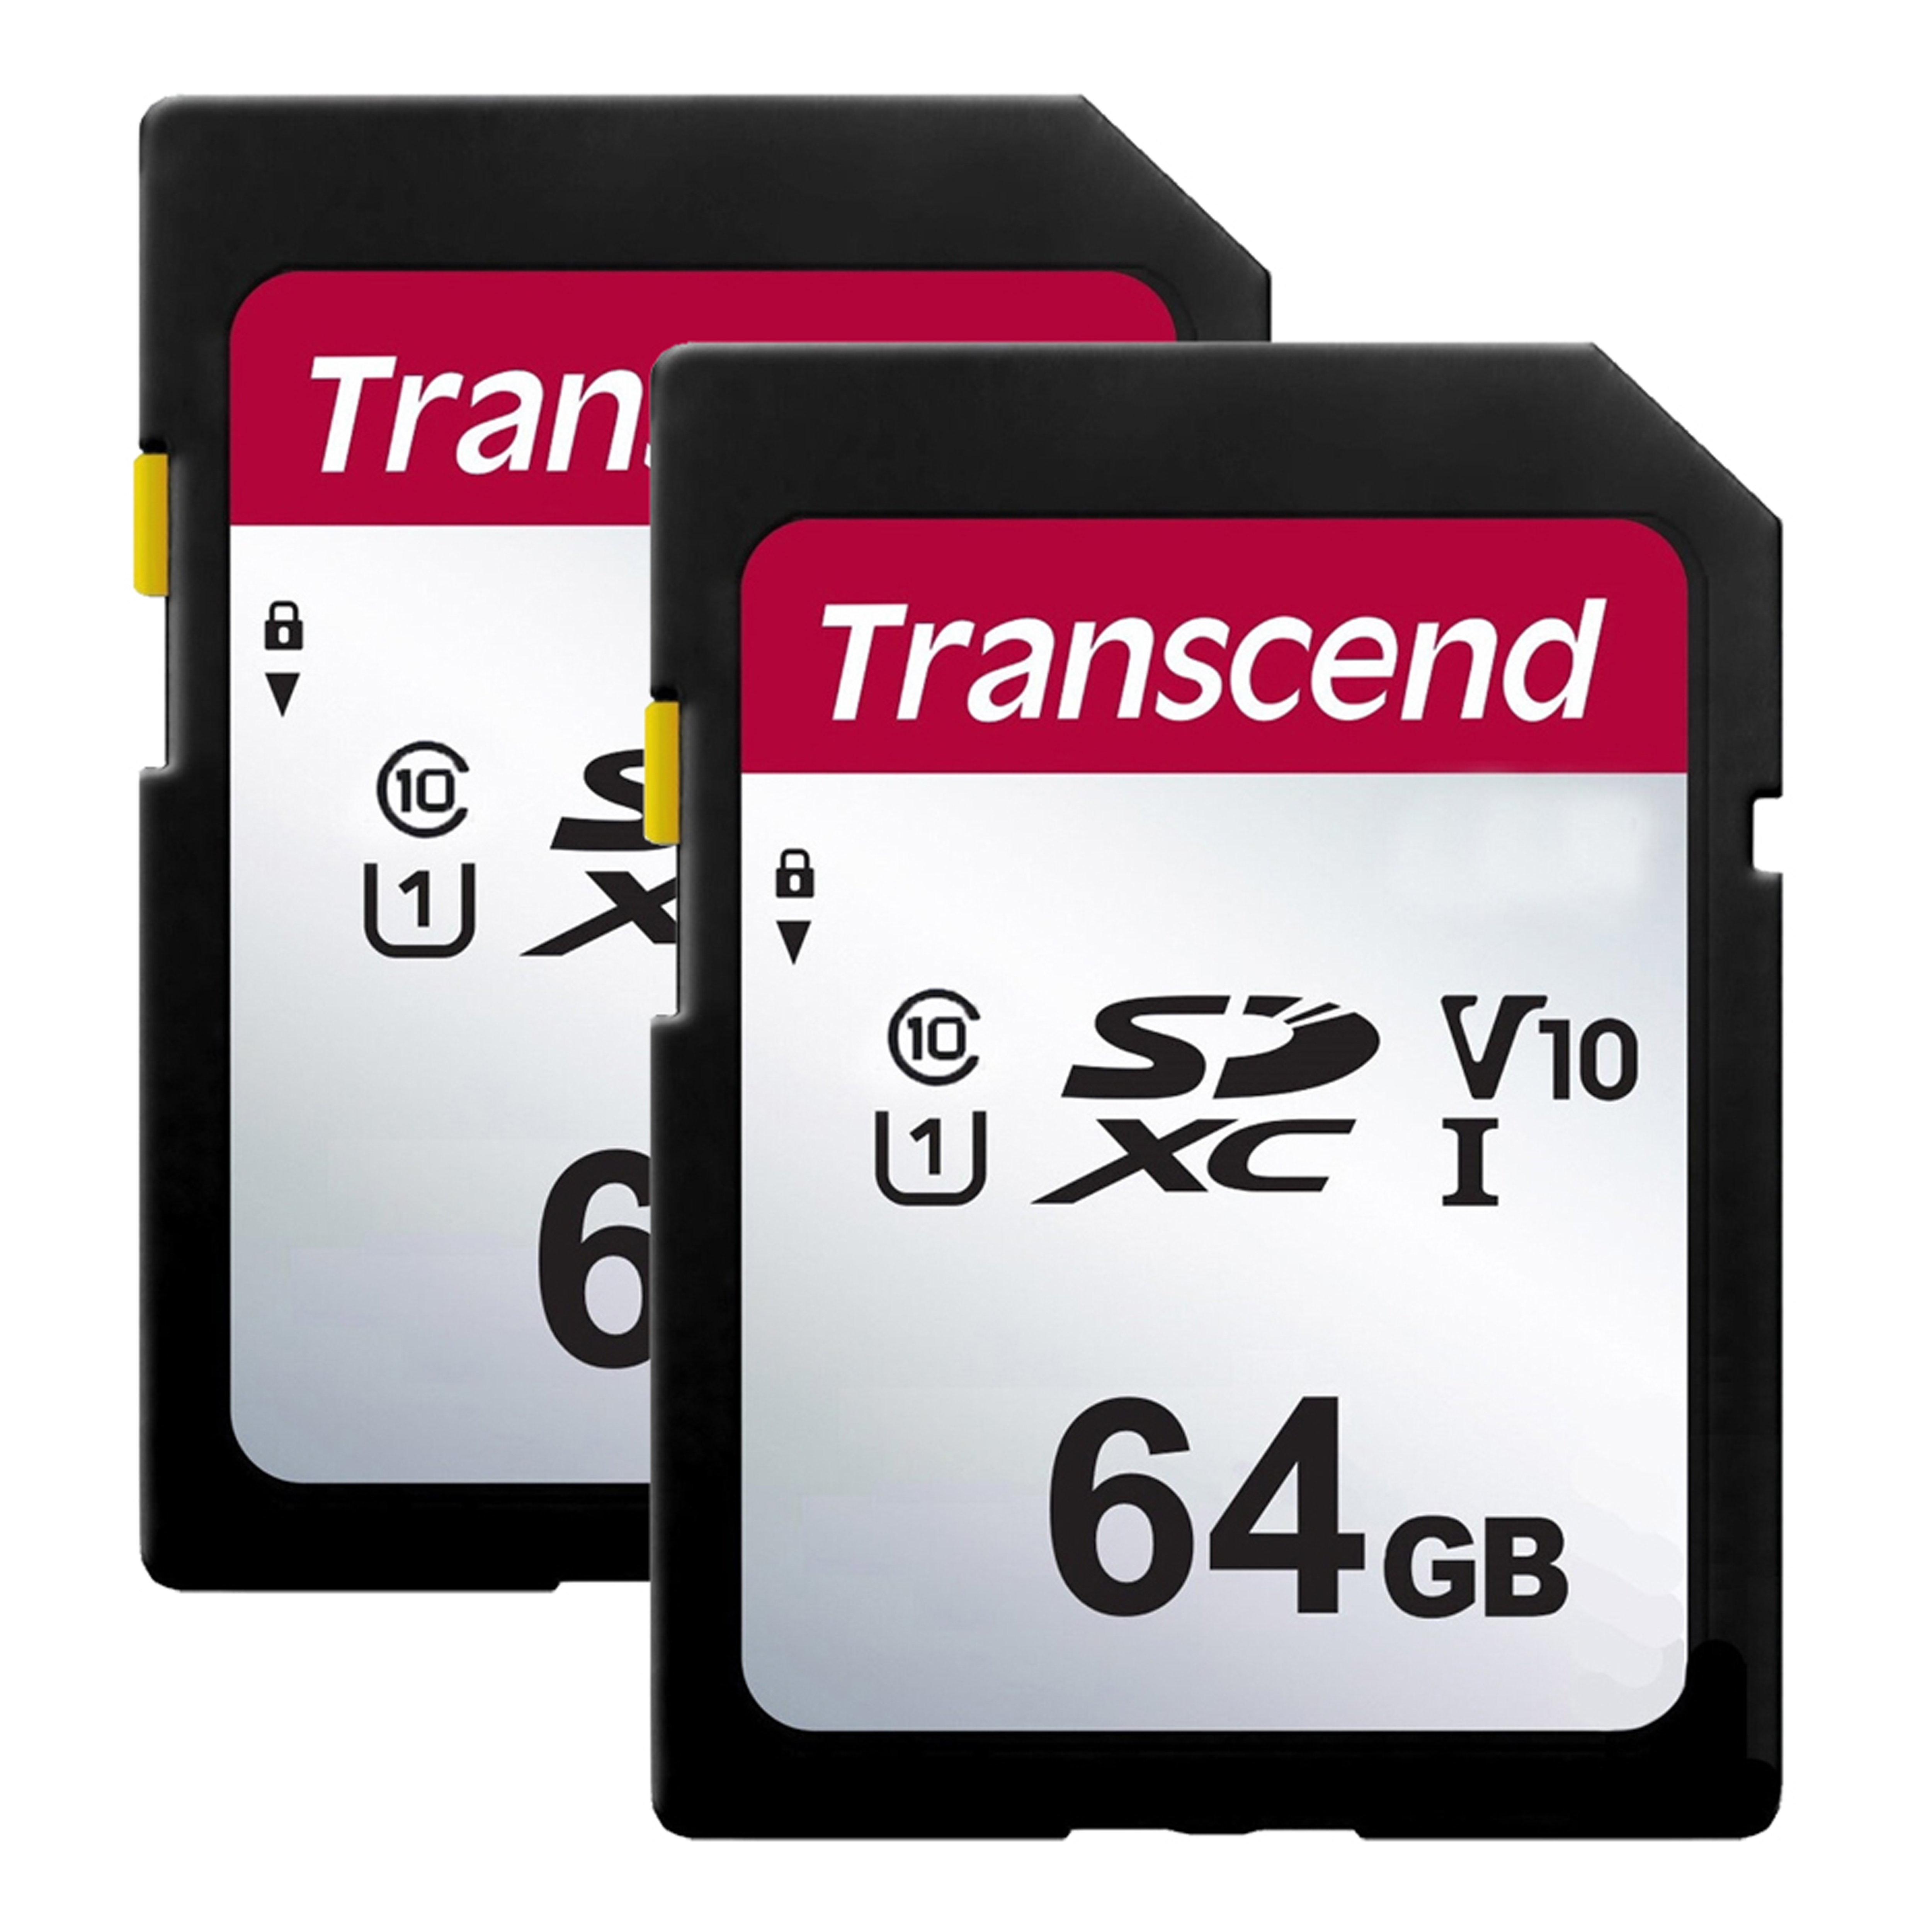 Memory Cards for ZoomCamcorder